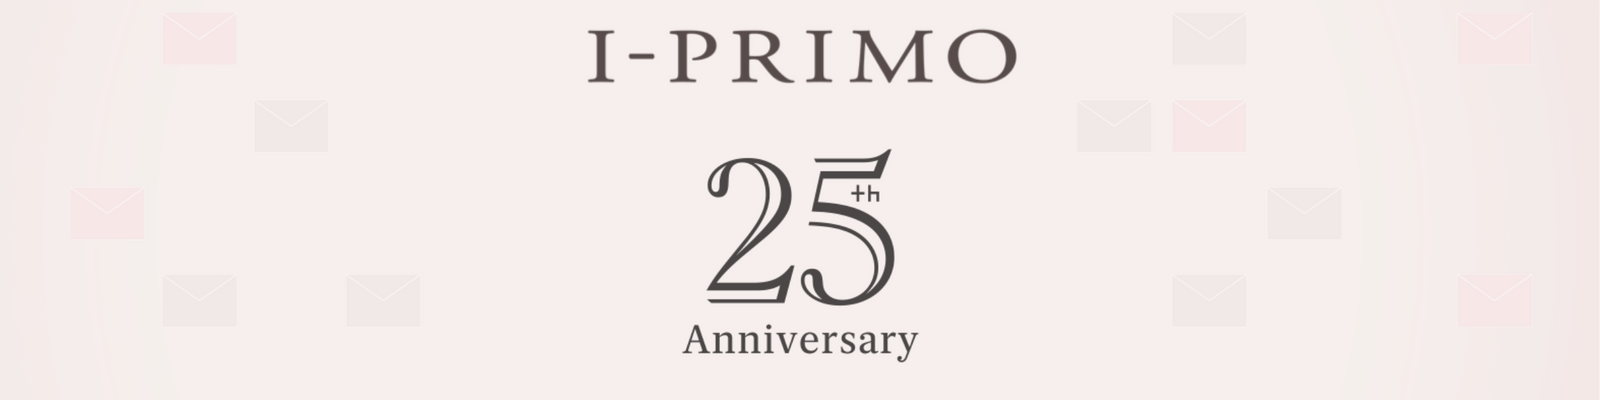 Our First Step －I-PRIMO 25周年品牌特展